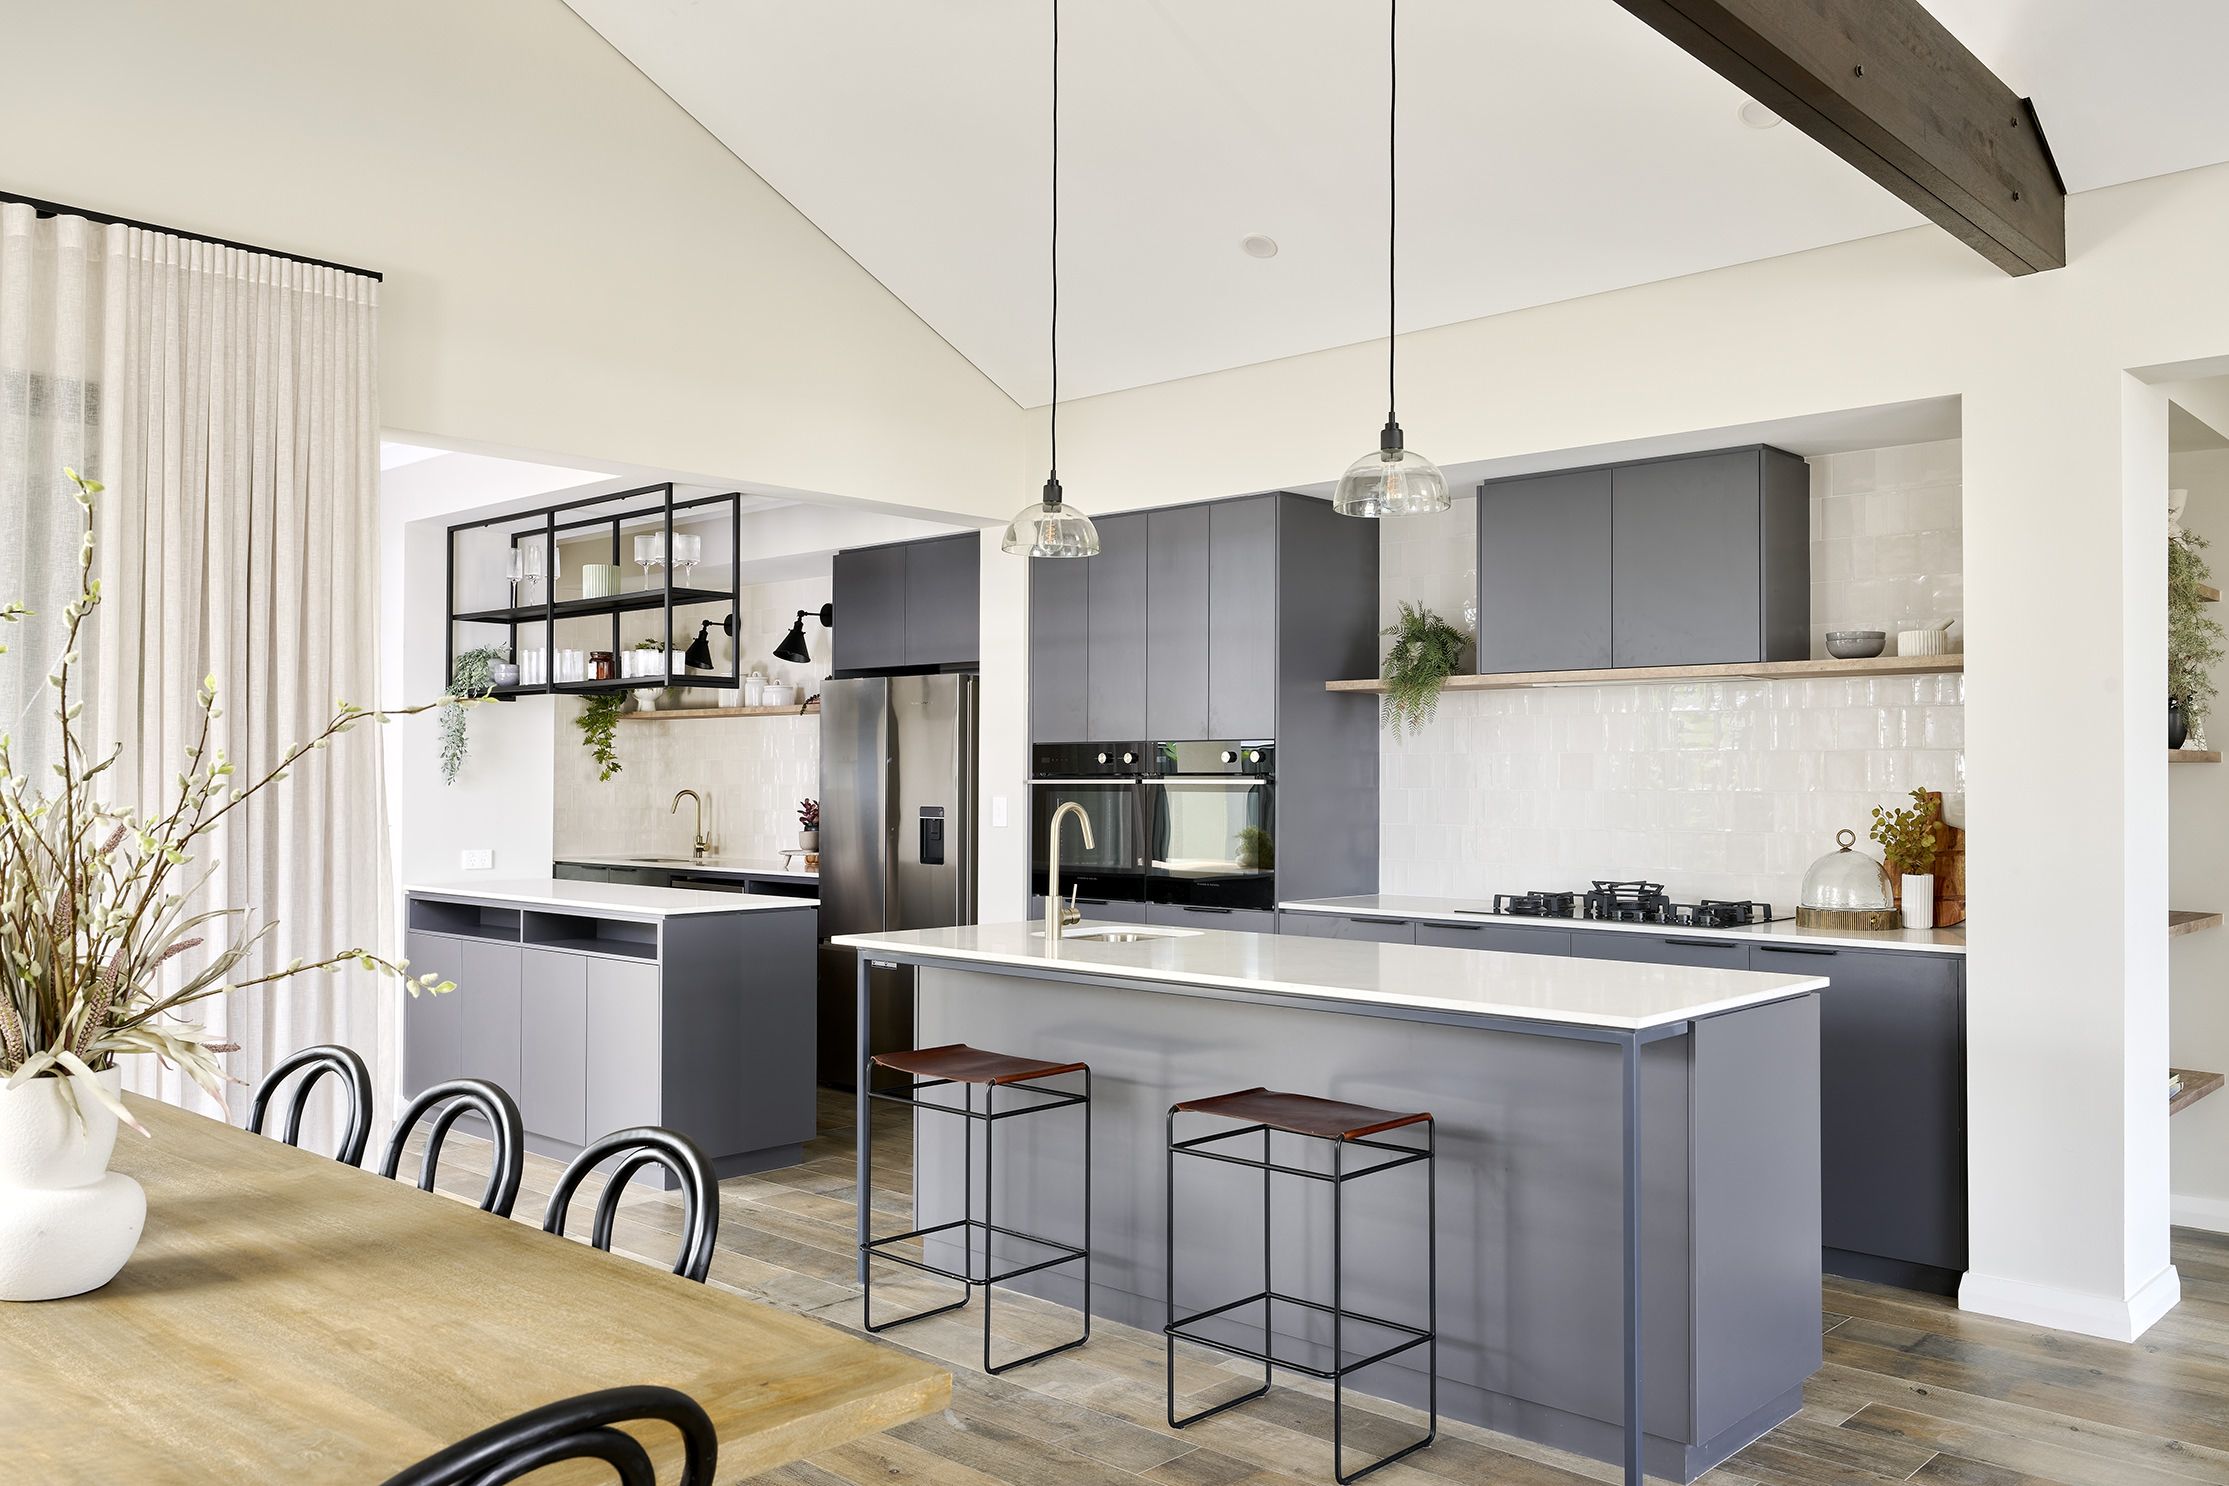 New Choice Homes The Reef kitchen and dining